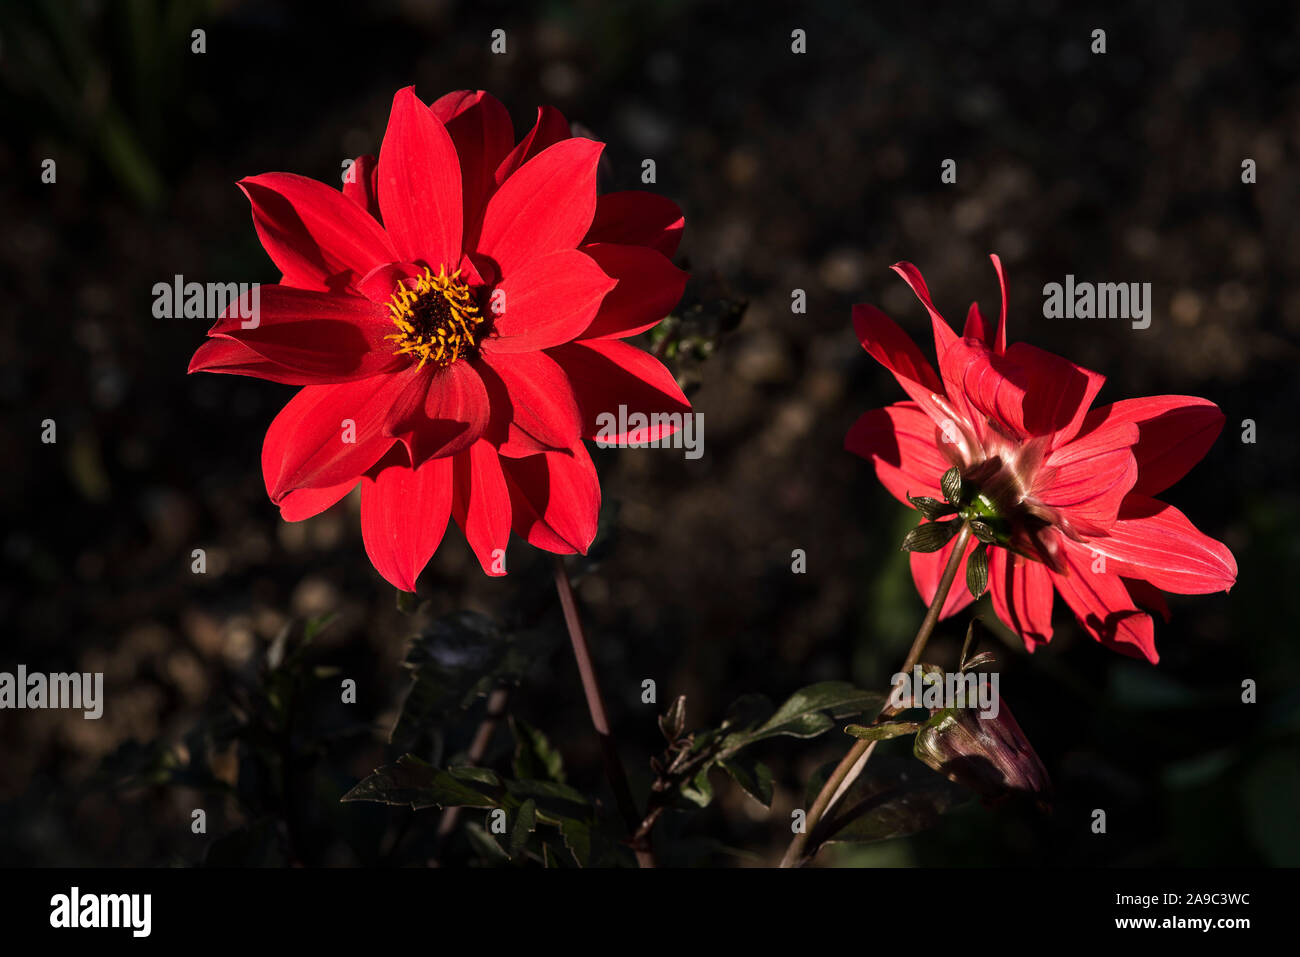 Dahlia Tally Ho With A Bright Red Flower And A Dark Pollenous